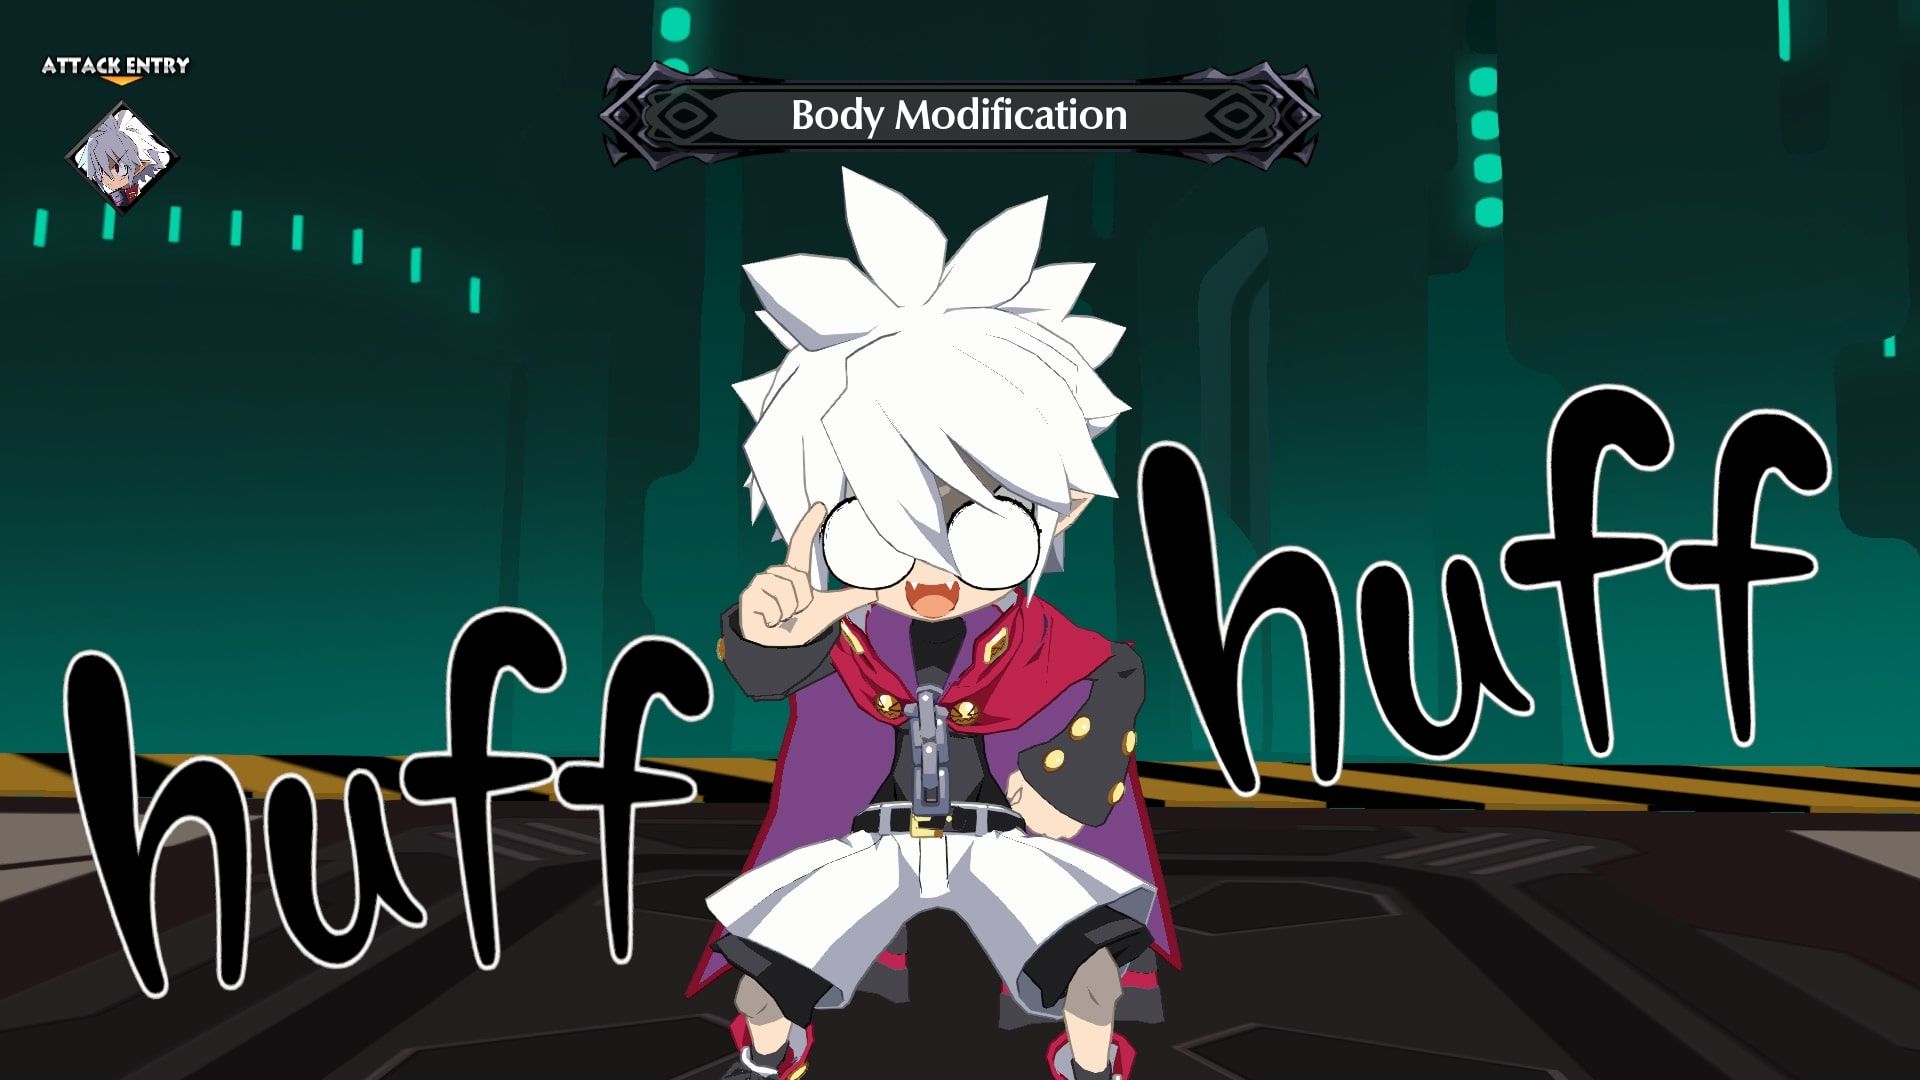 Disgaea 6 Mao huffing and puffing over Body Modification